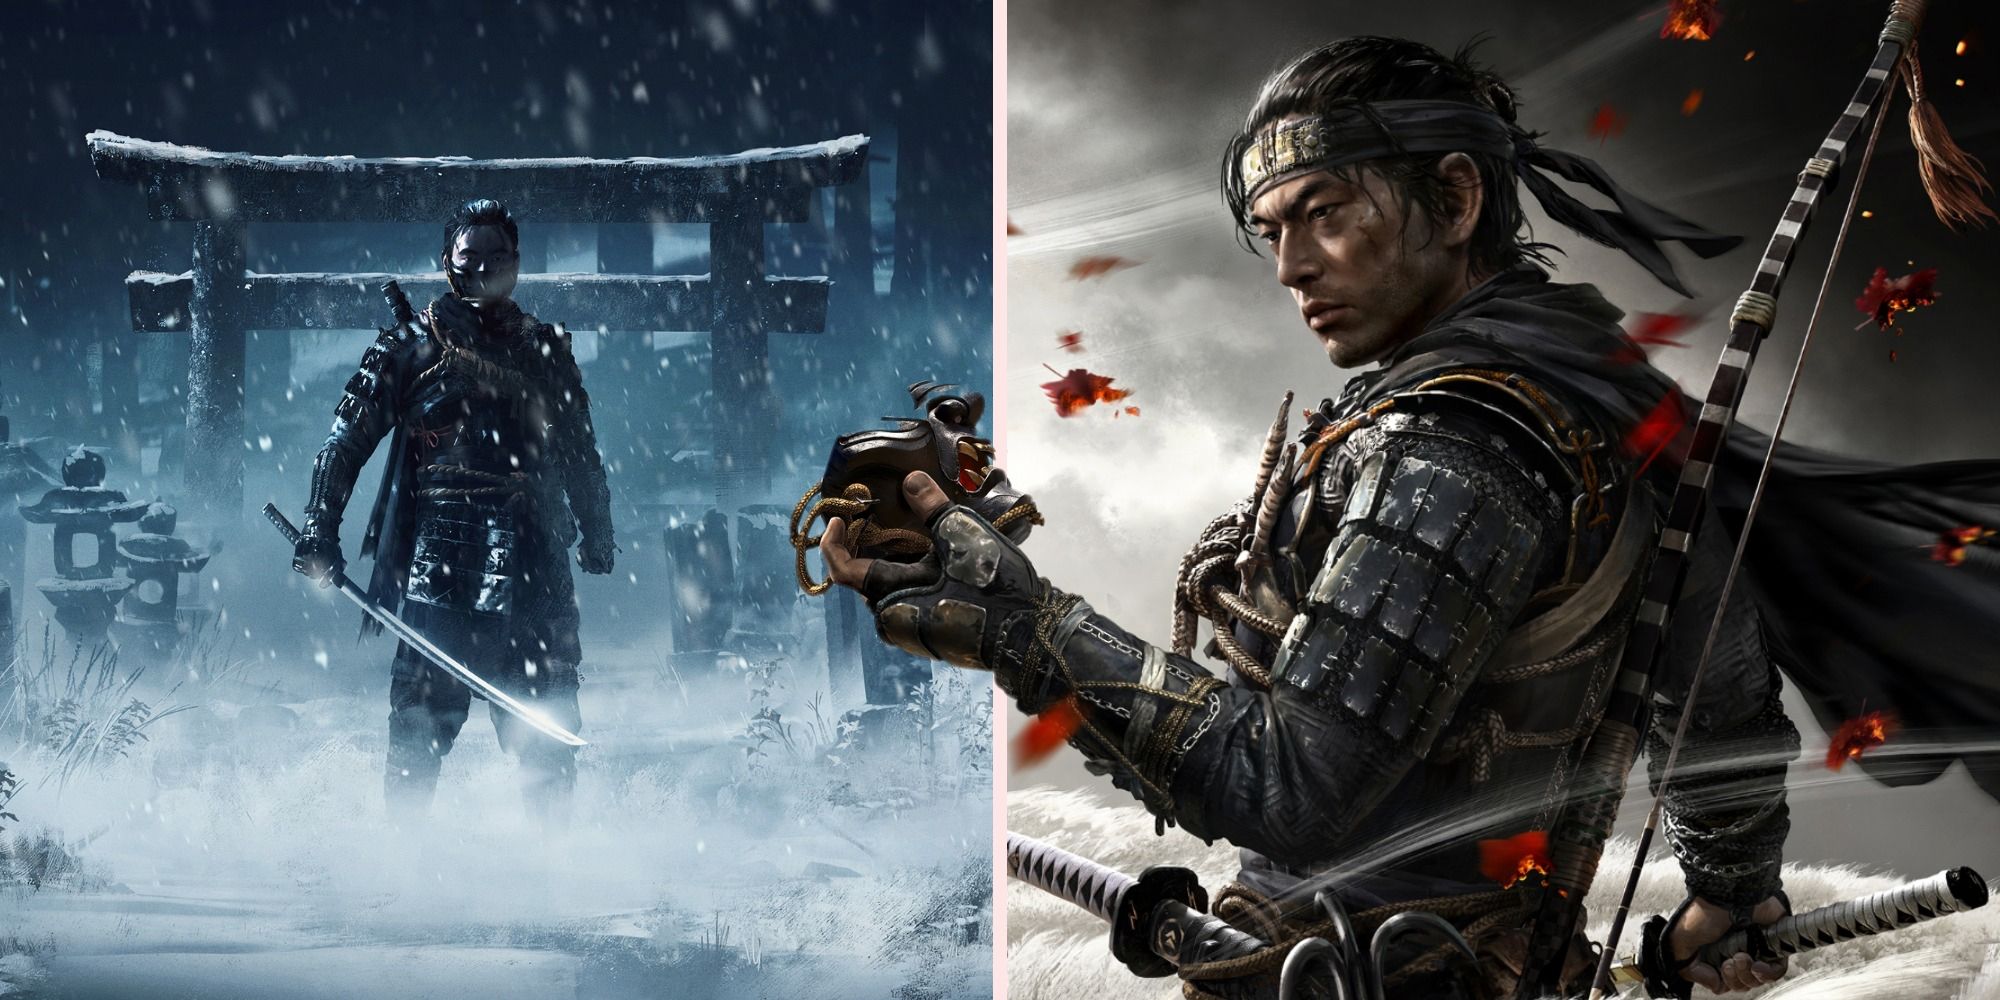 15 Things You Didn't Know About Jin Sakai From Ghost Of Tsushima